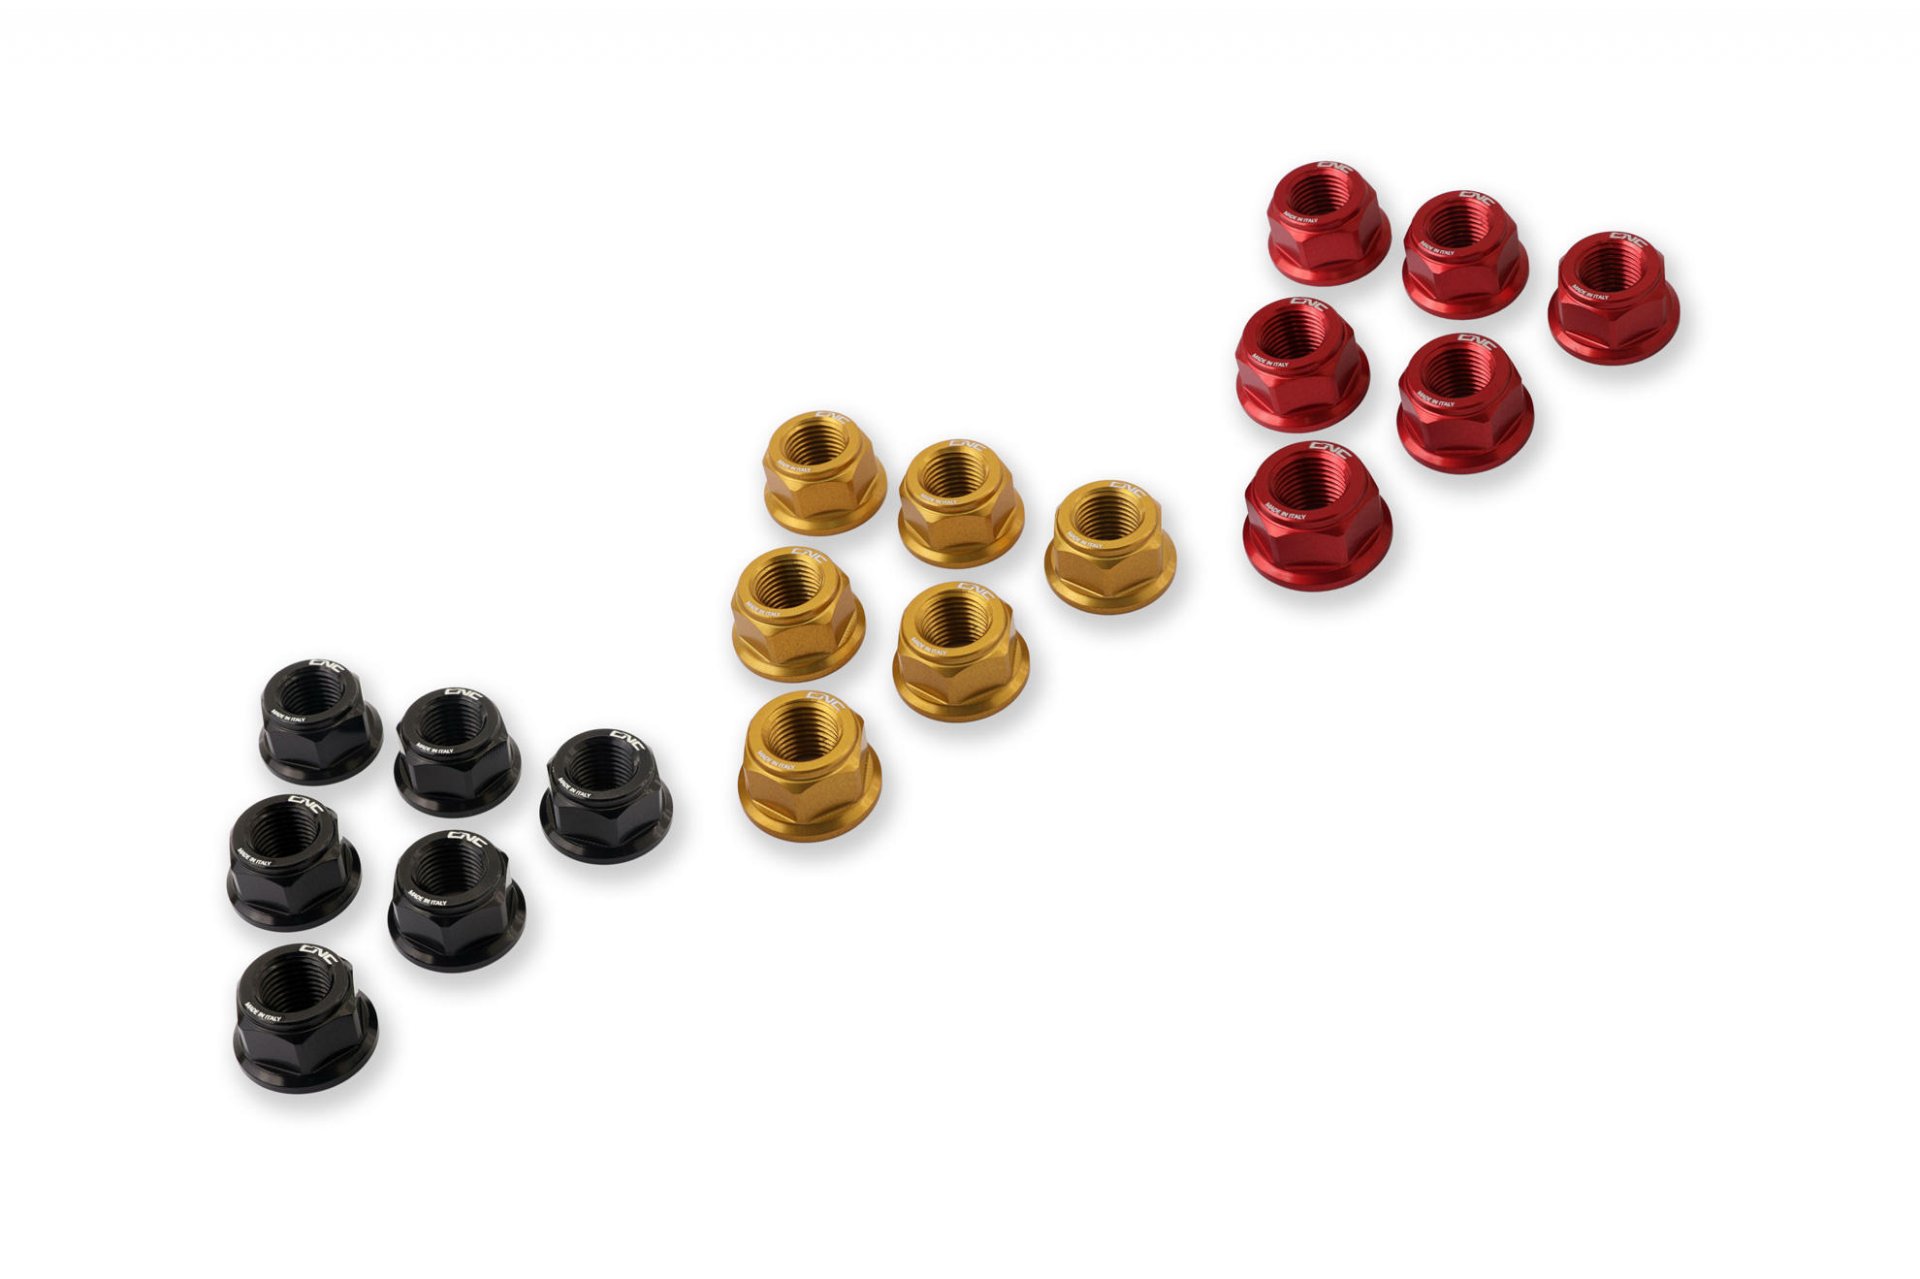 CNC RACING NUTS SETS REAR SPROCKET FLANGE M10x1.0 FOR DUCATI